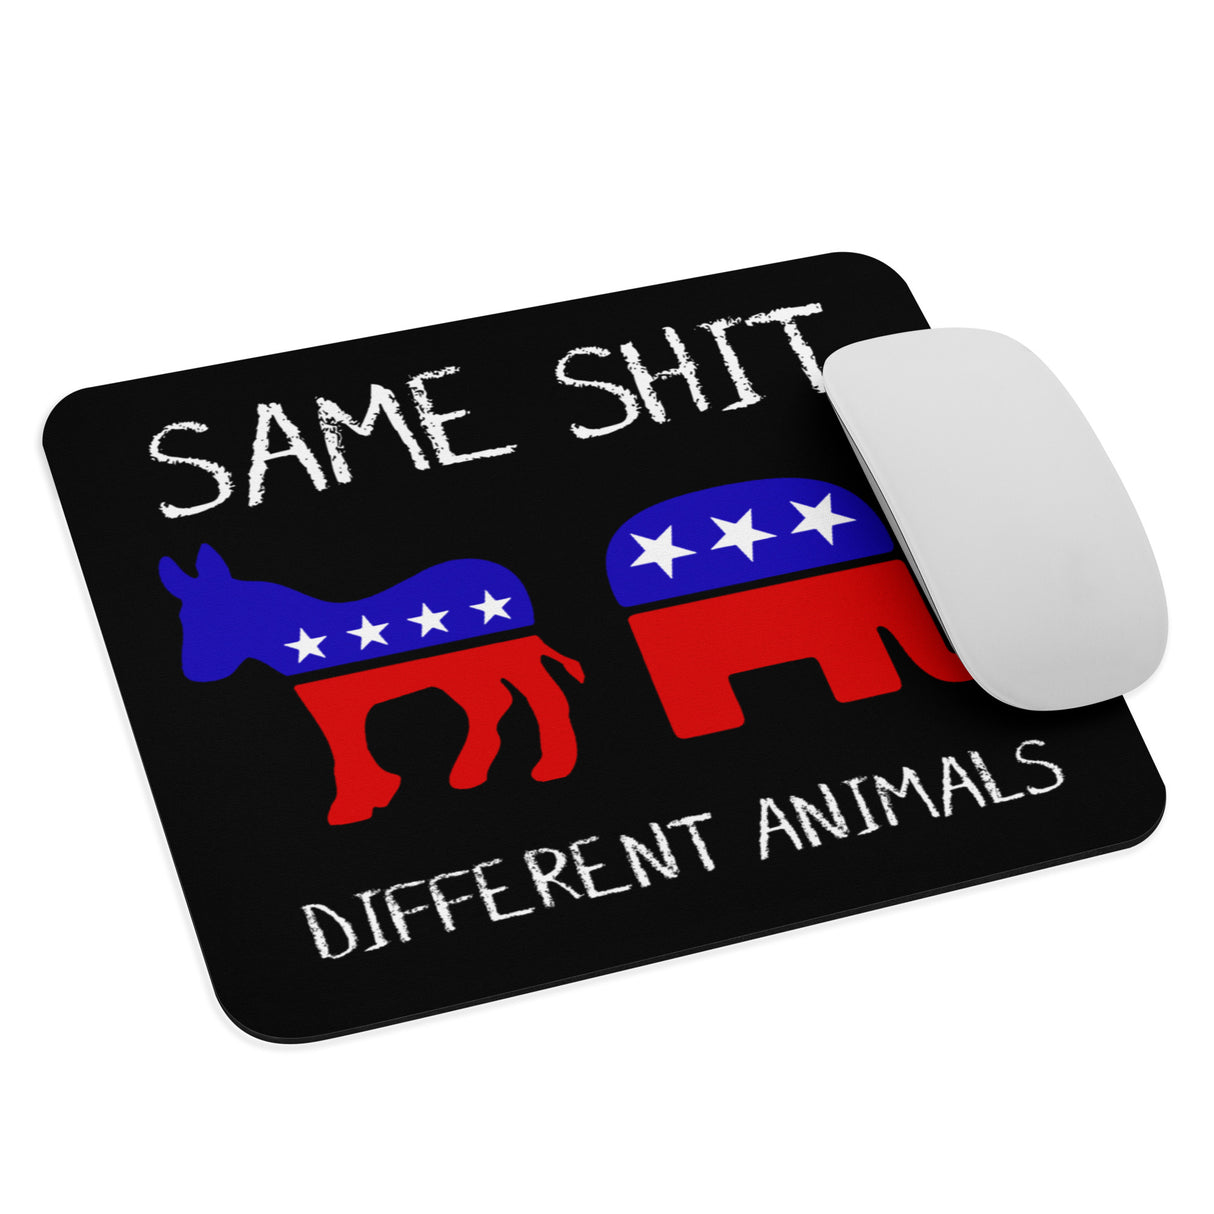 Same Shit Different Animals Mouse Pad - Libertarian Country